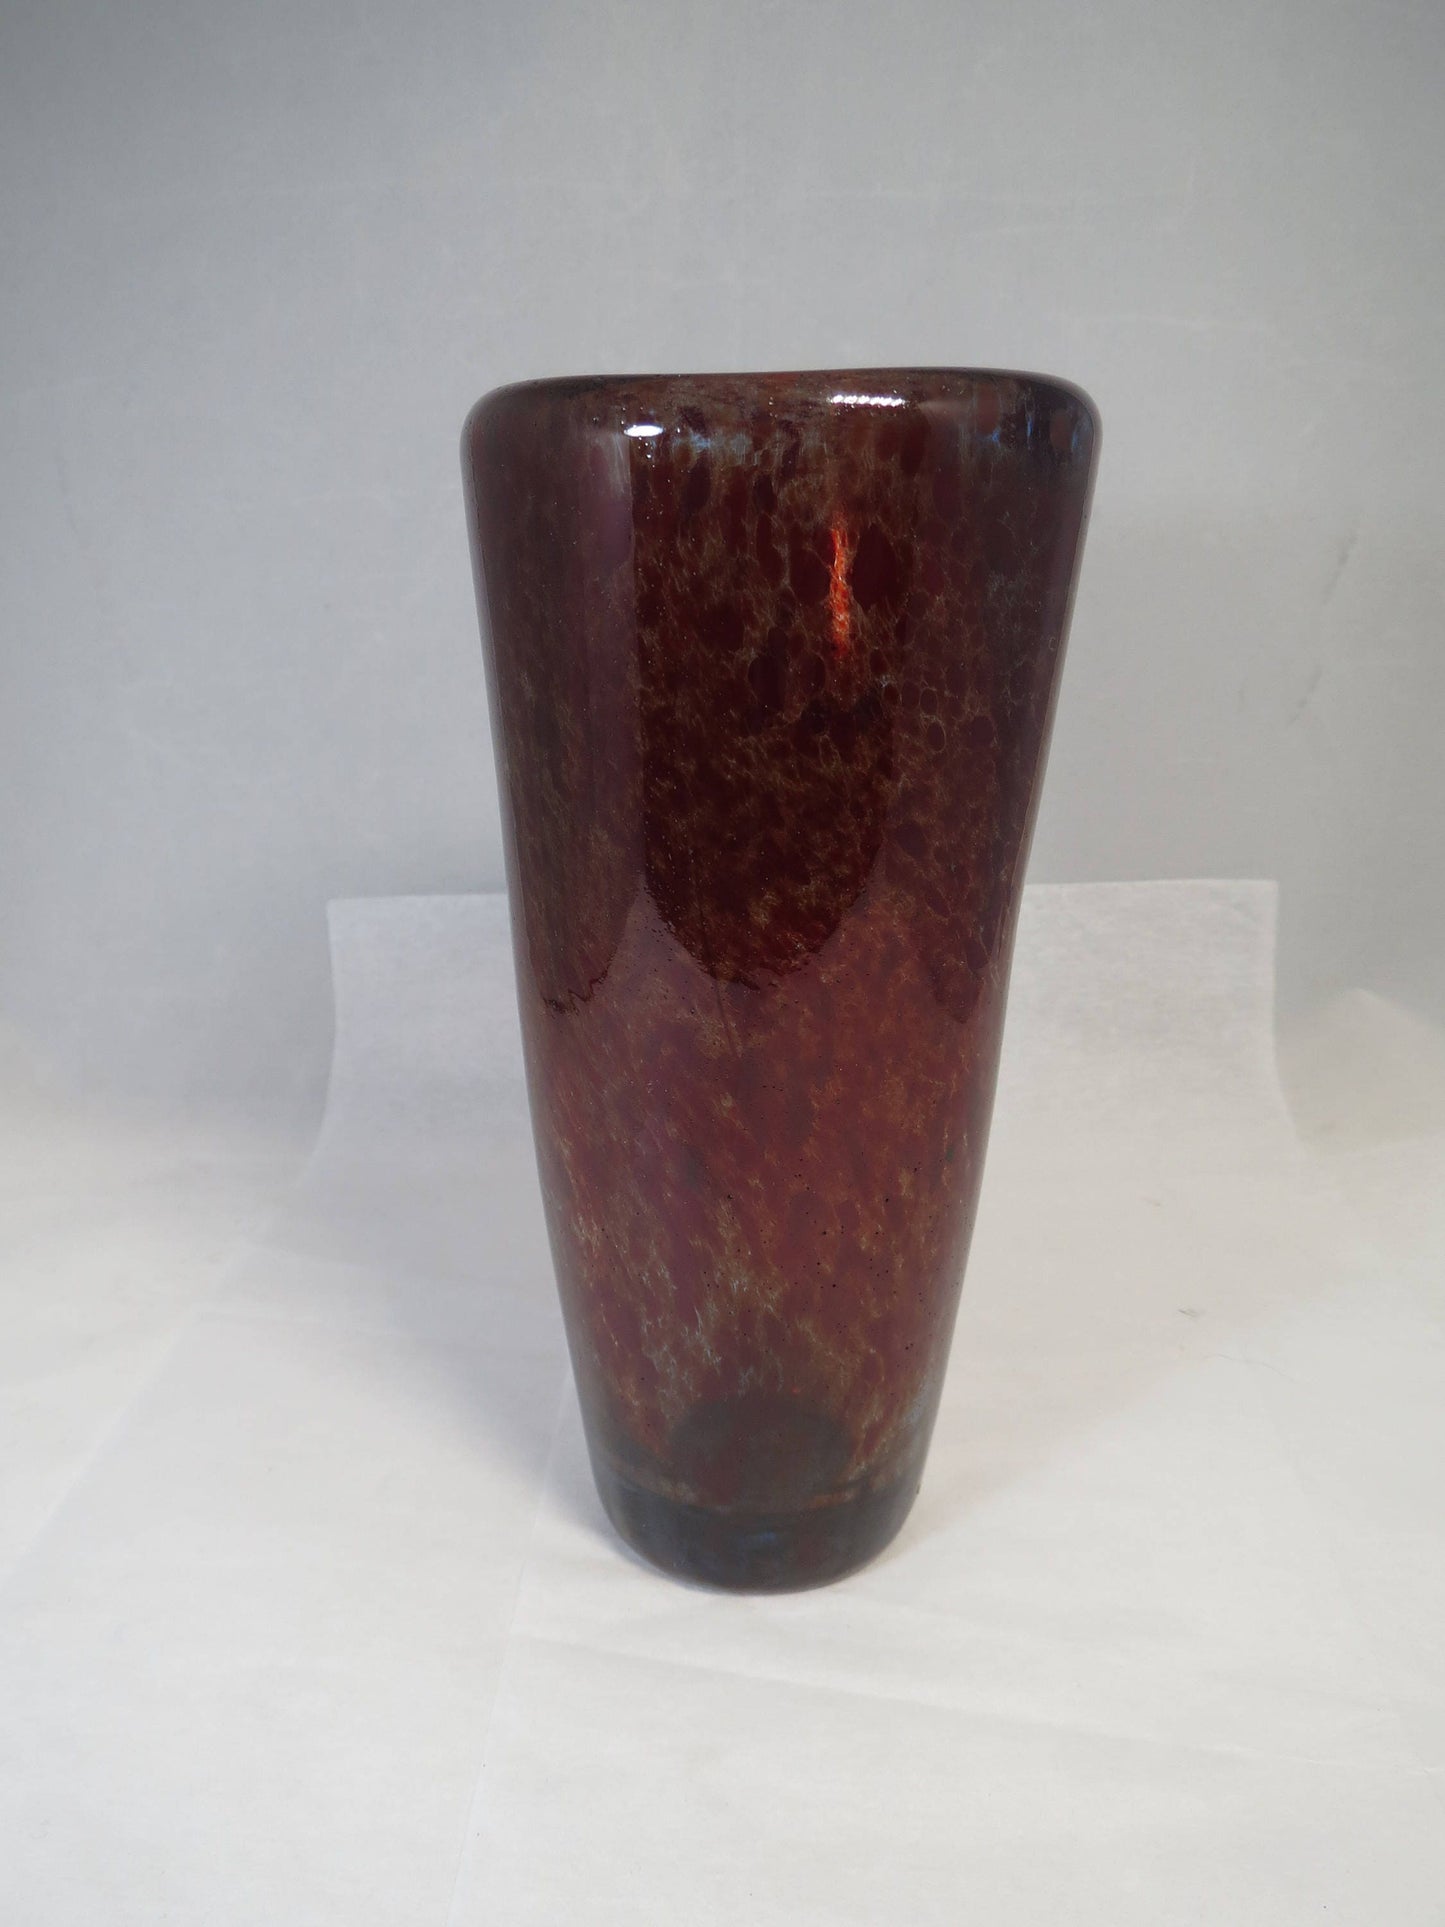 Handblown Red Glass Vase - Speckled Artisan Glass, Small Maroon Vase, Red Home Accessory, Floral Display, Collectible Glass - Duckwells